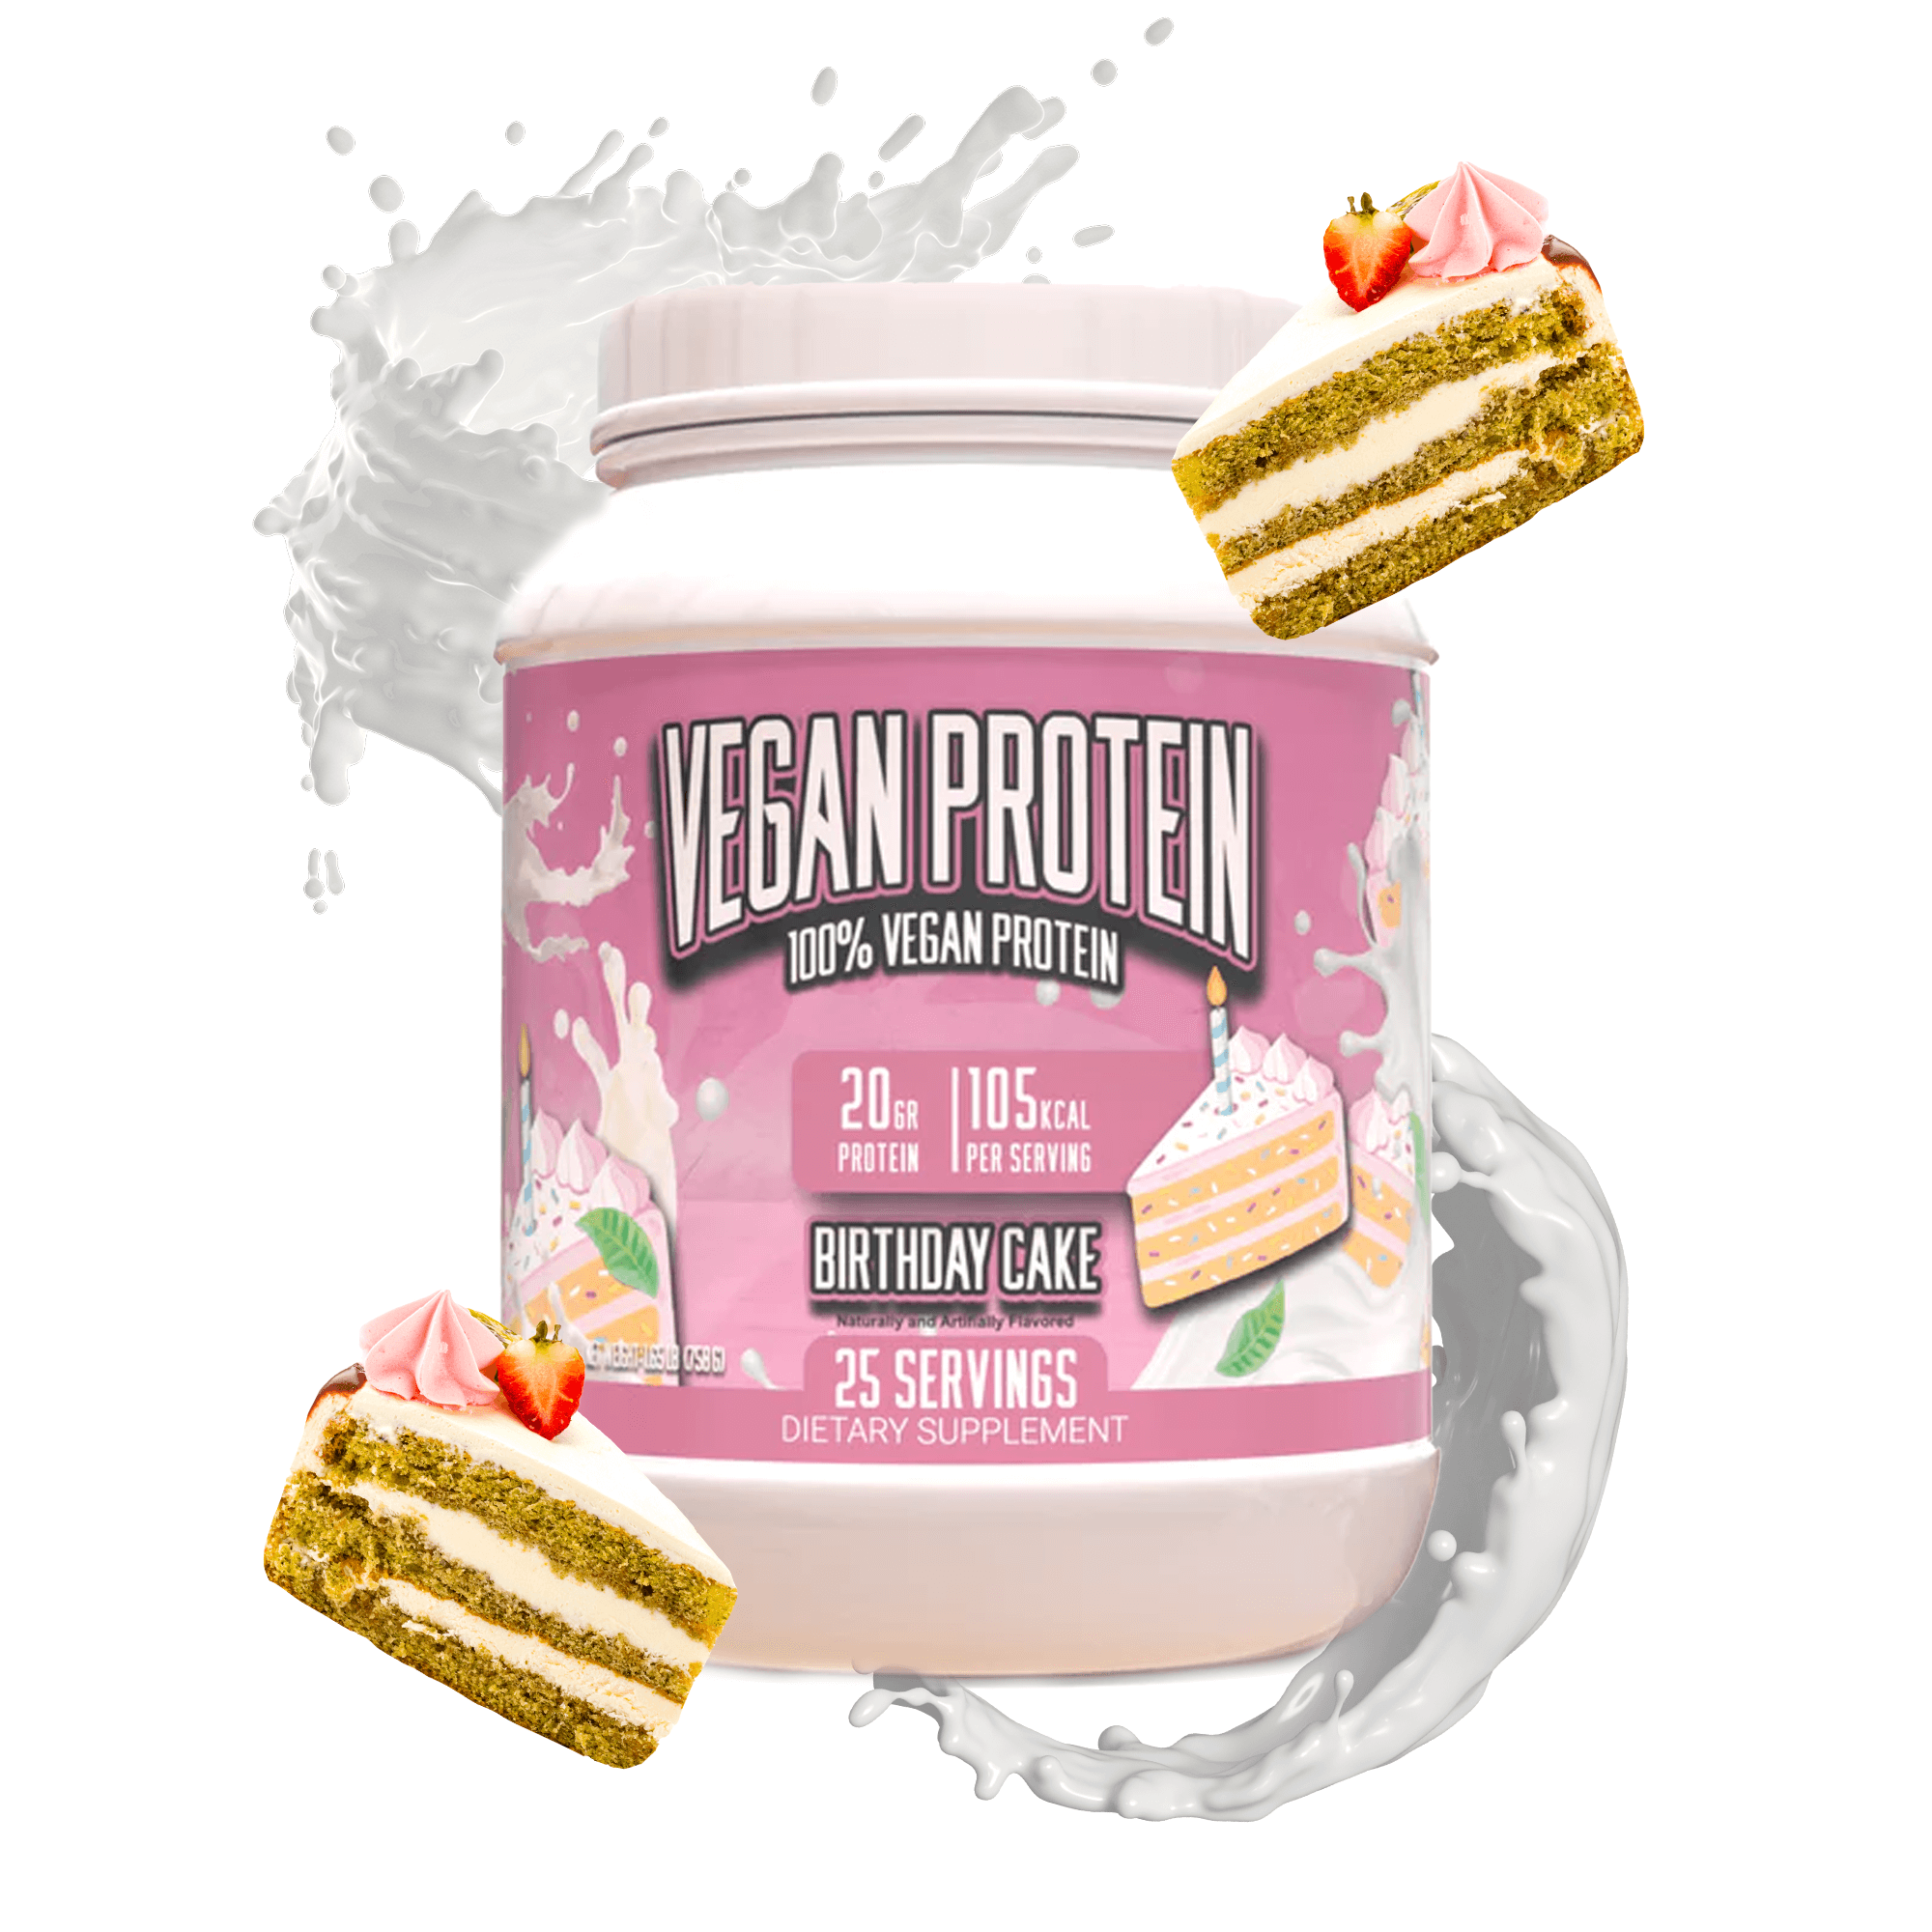 Vegan Protein - High-Quality Plant-Based Protein Powder - 20g Protein Per Serving - Huge Supplements